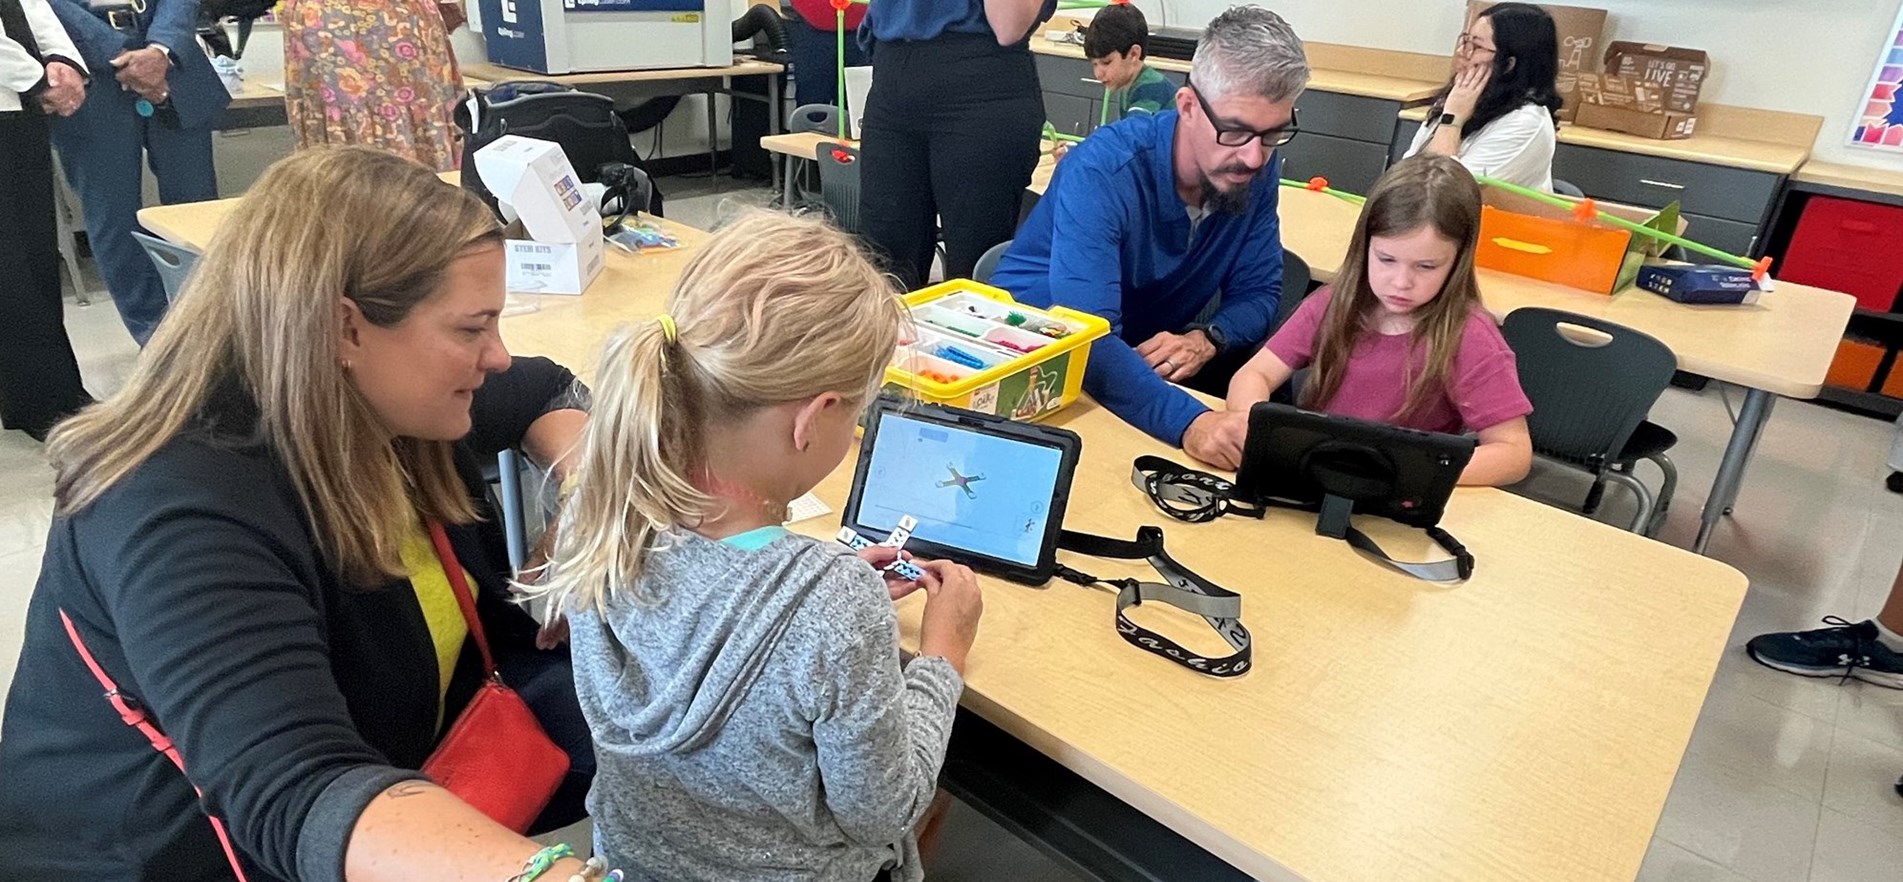 META representatives, others, work with students on devices in new JES STEAM 